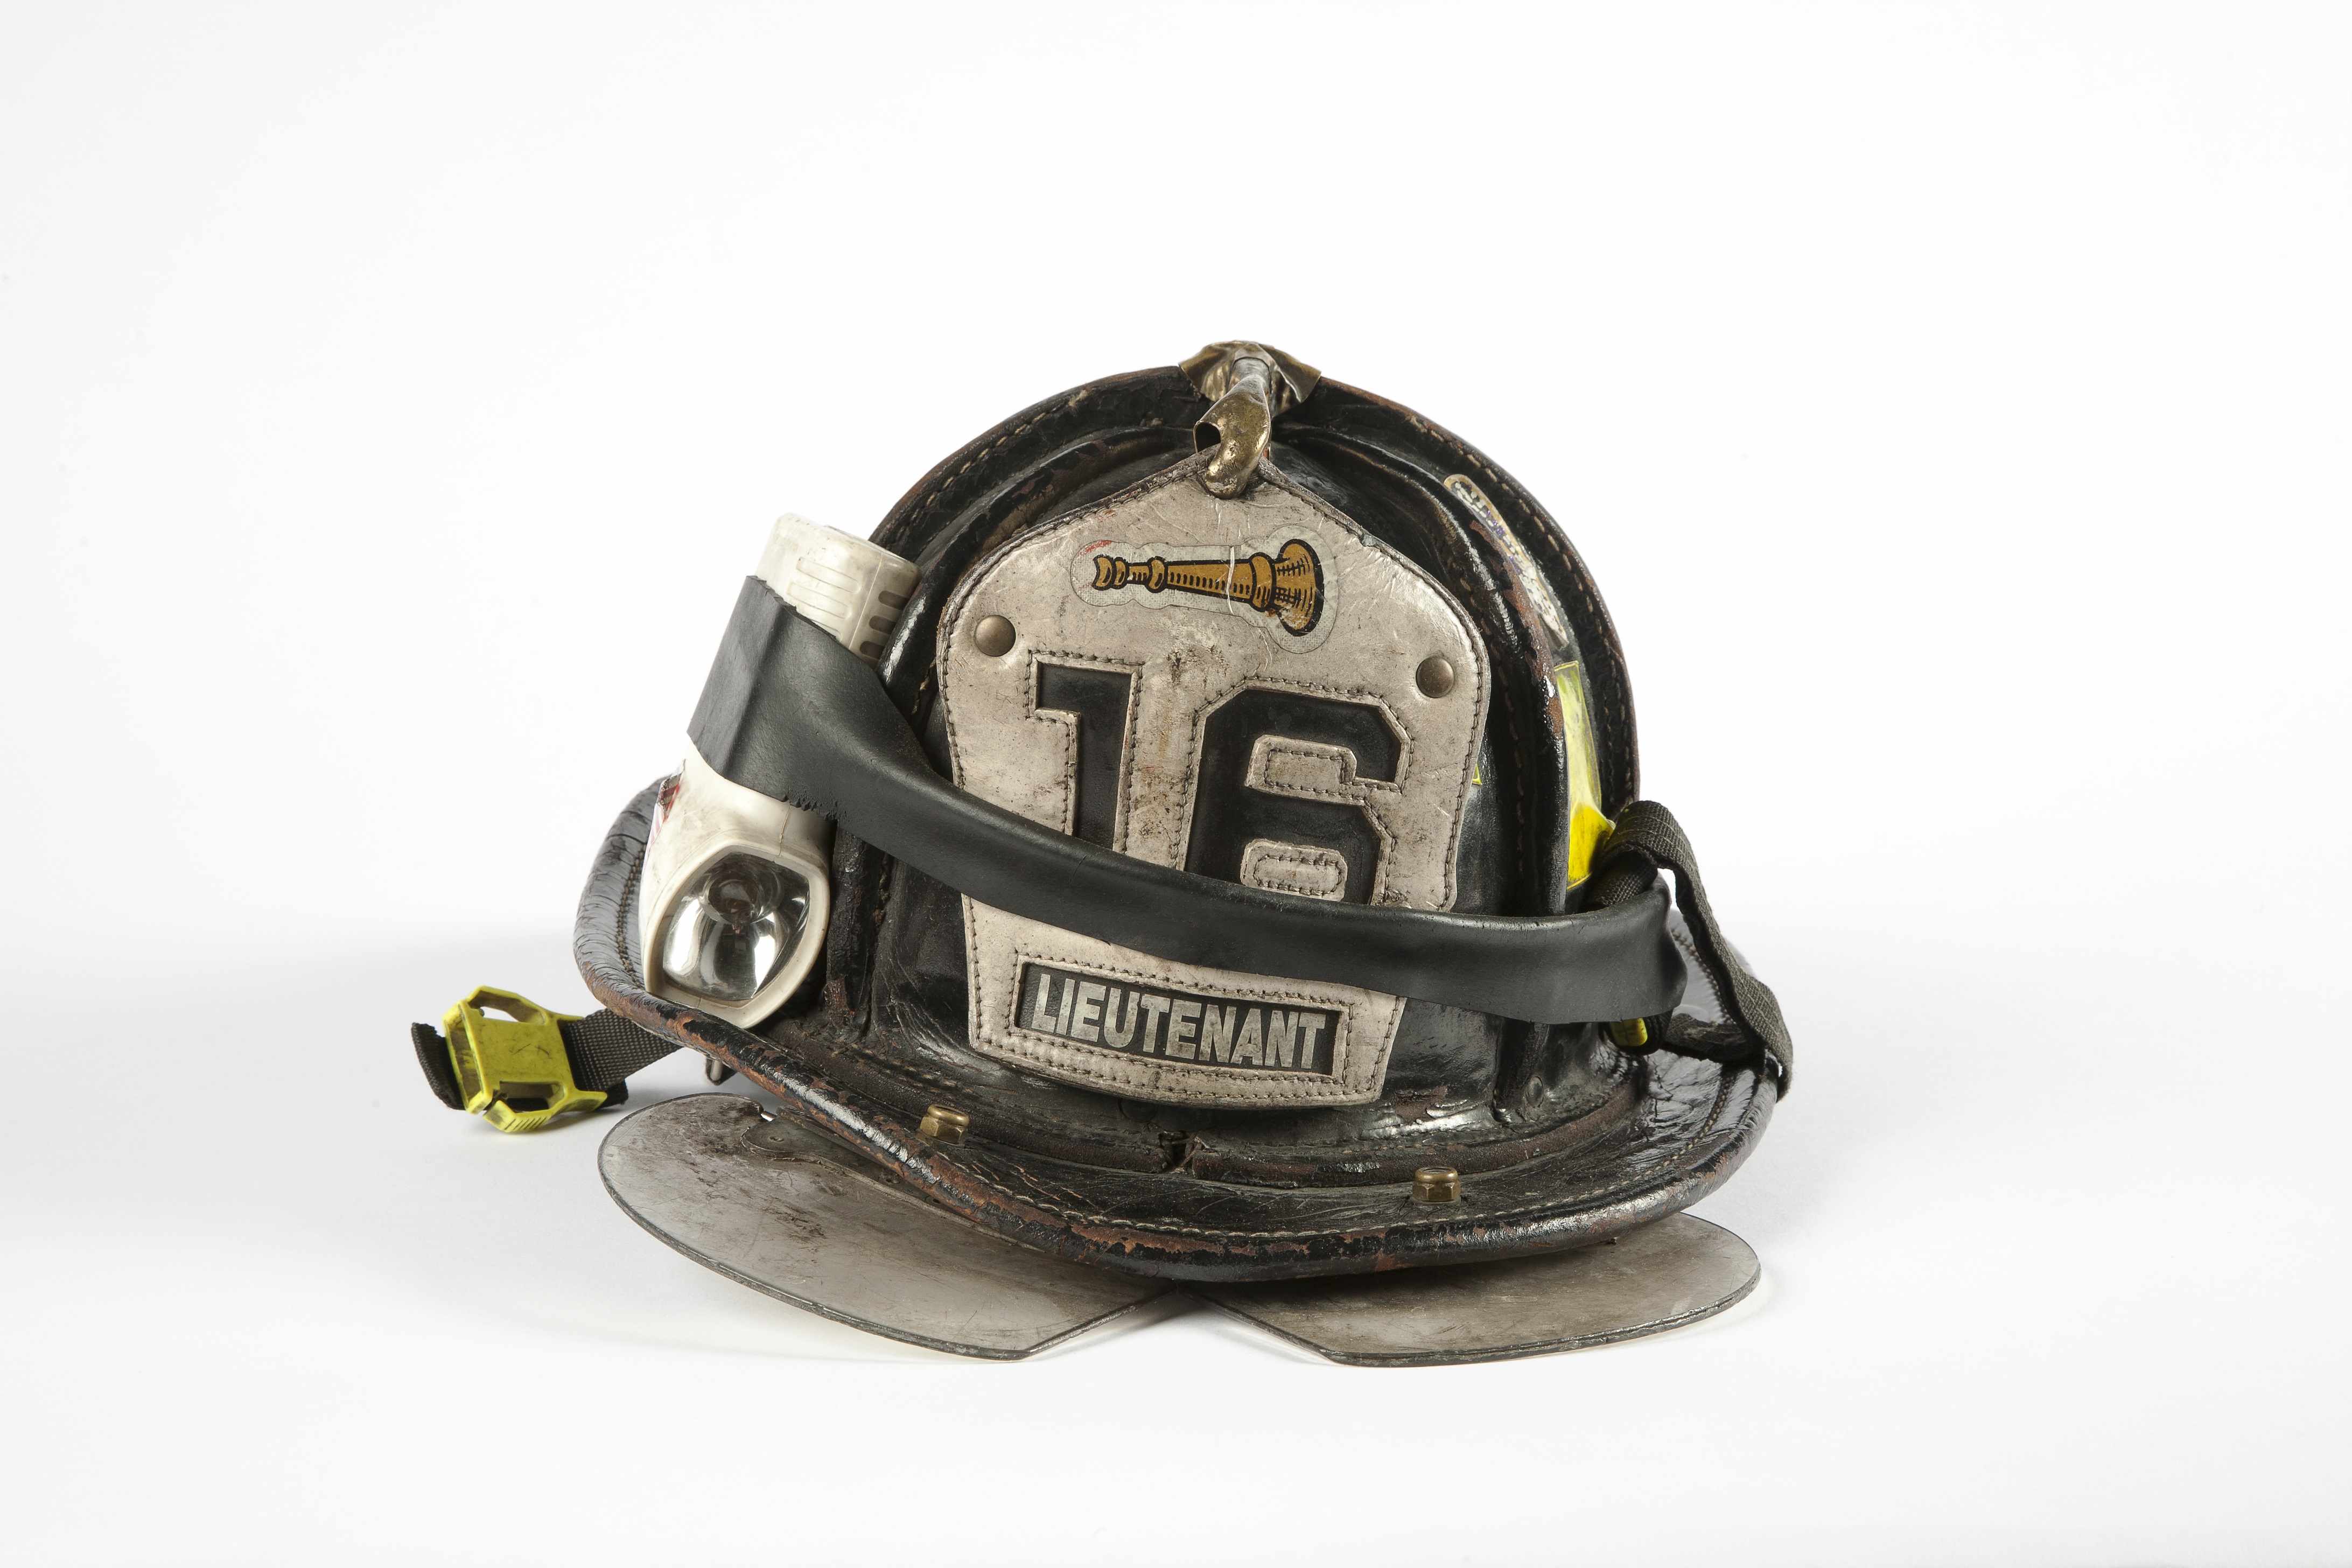 A black and white firefighter helmet with the number 16 and the word lieutenant on it is displayed on a white surface at the Museum.